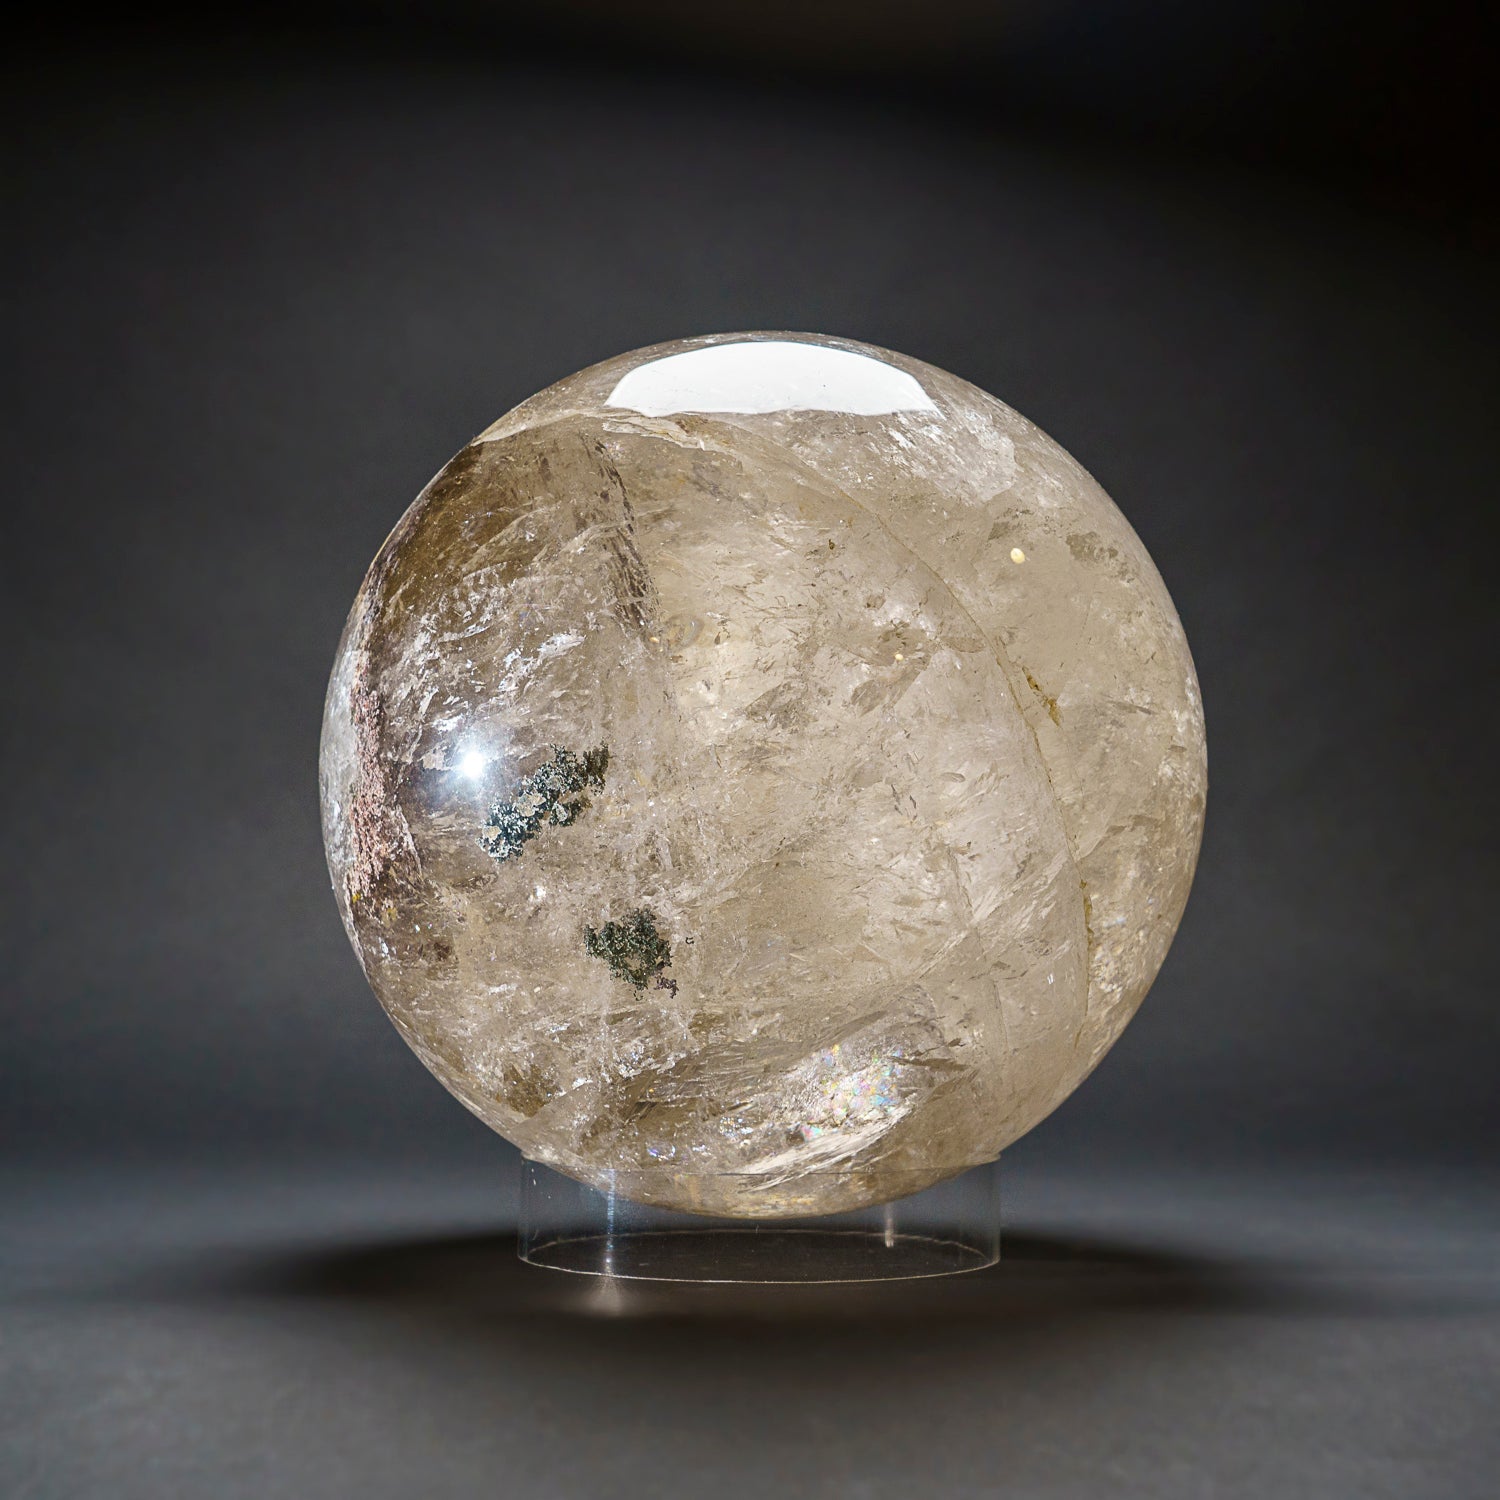 Large Genuine Polished Clear Quartz Sphere from Brazil (64 lbs)